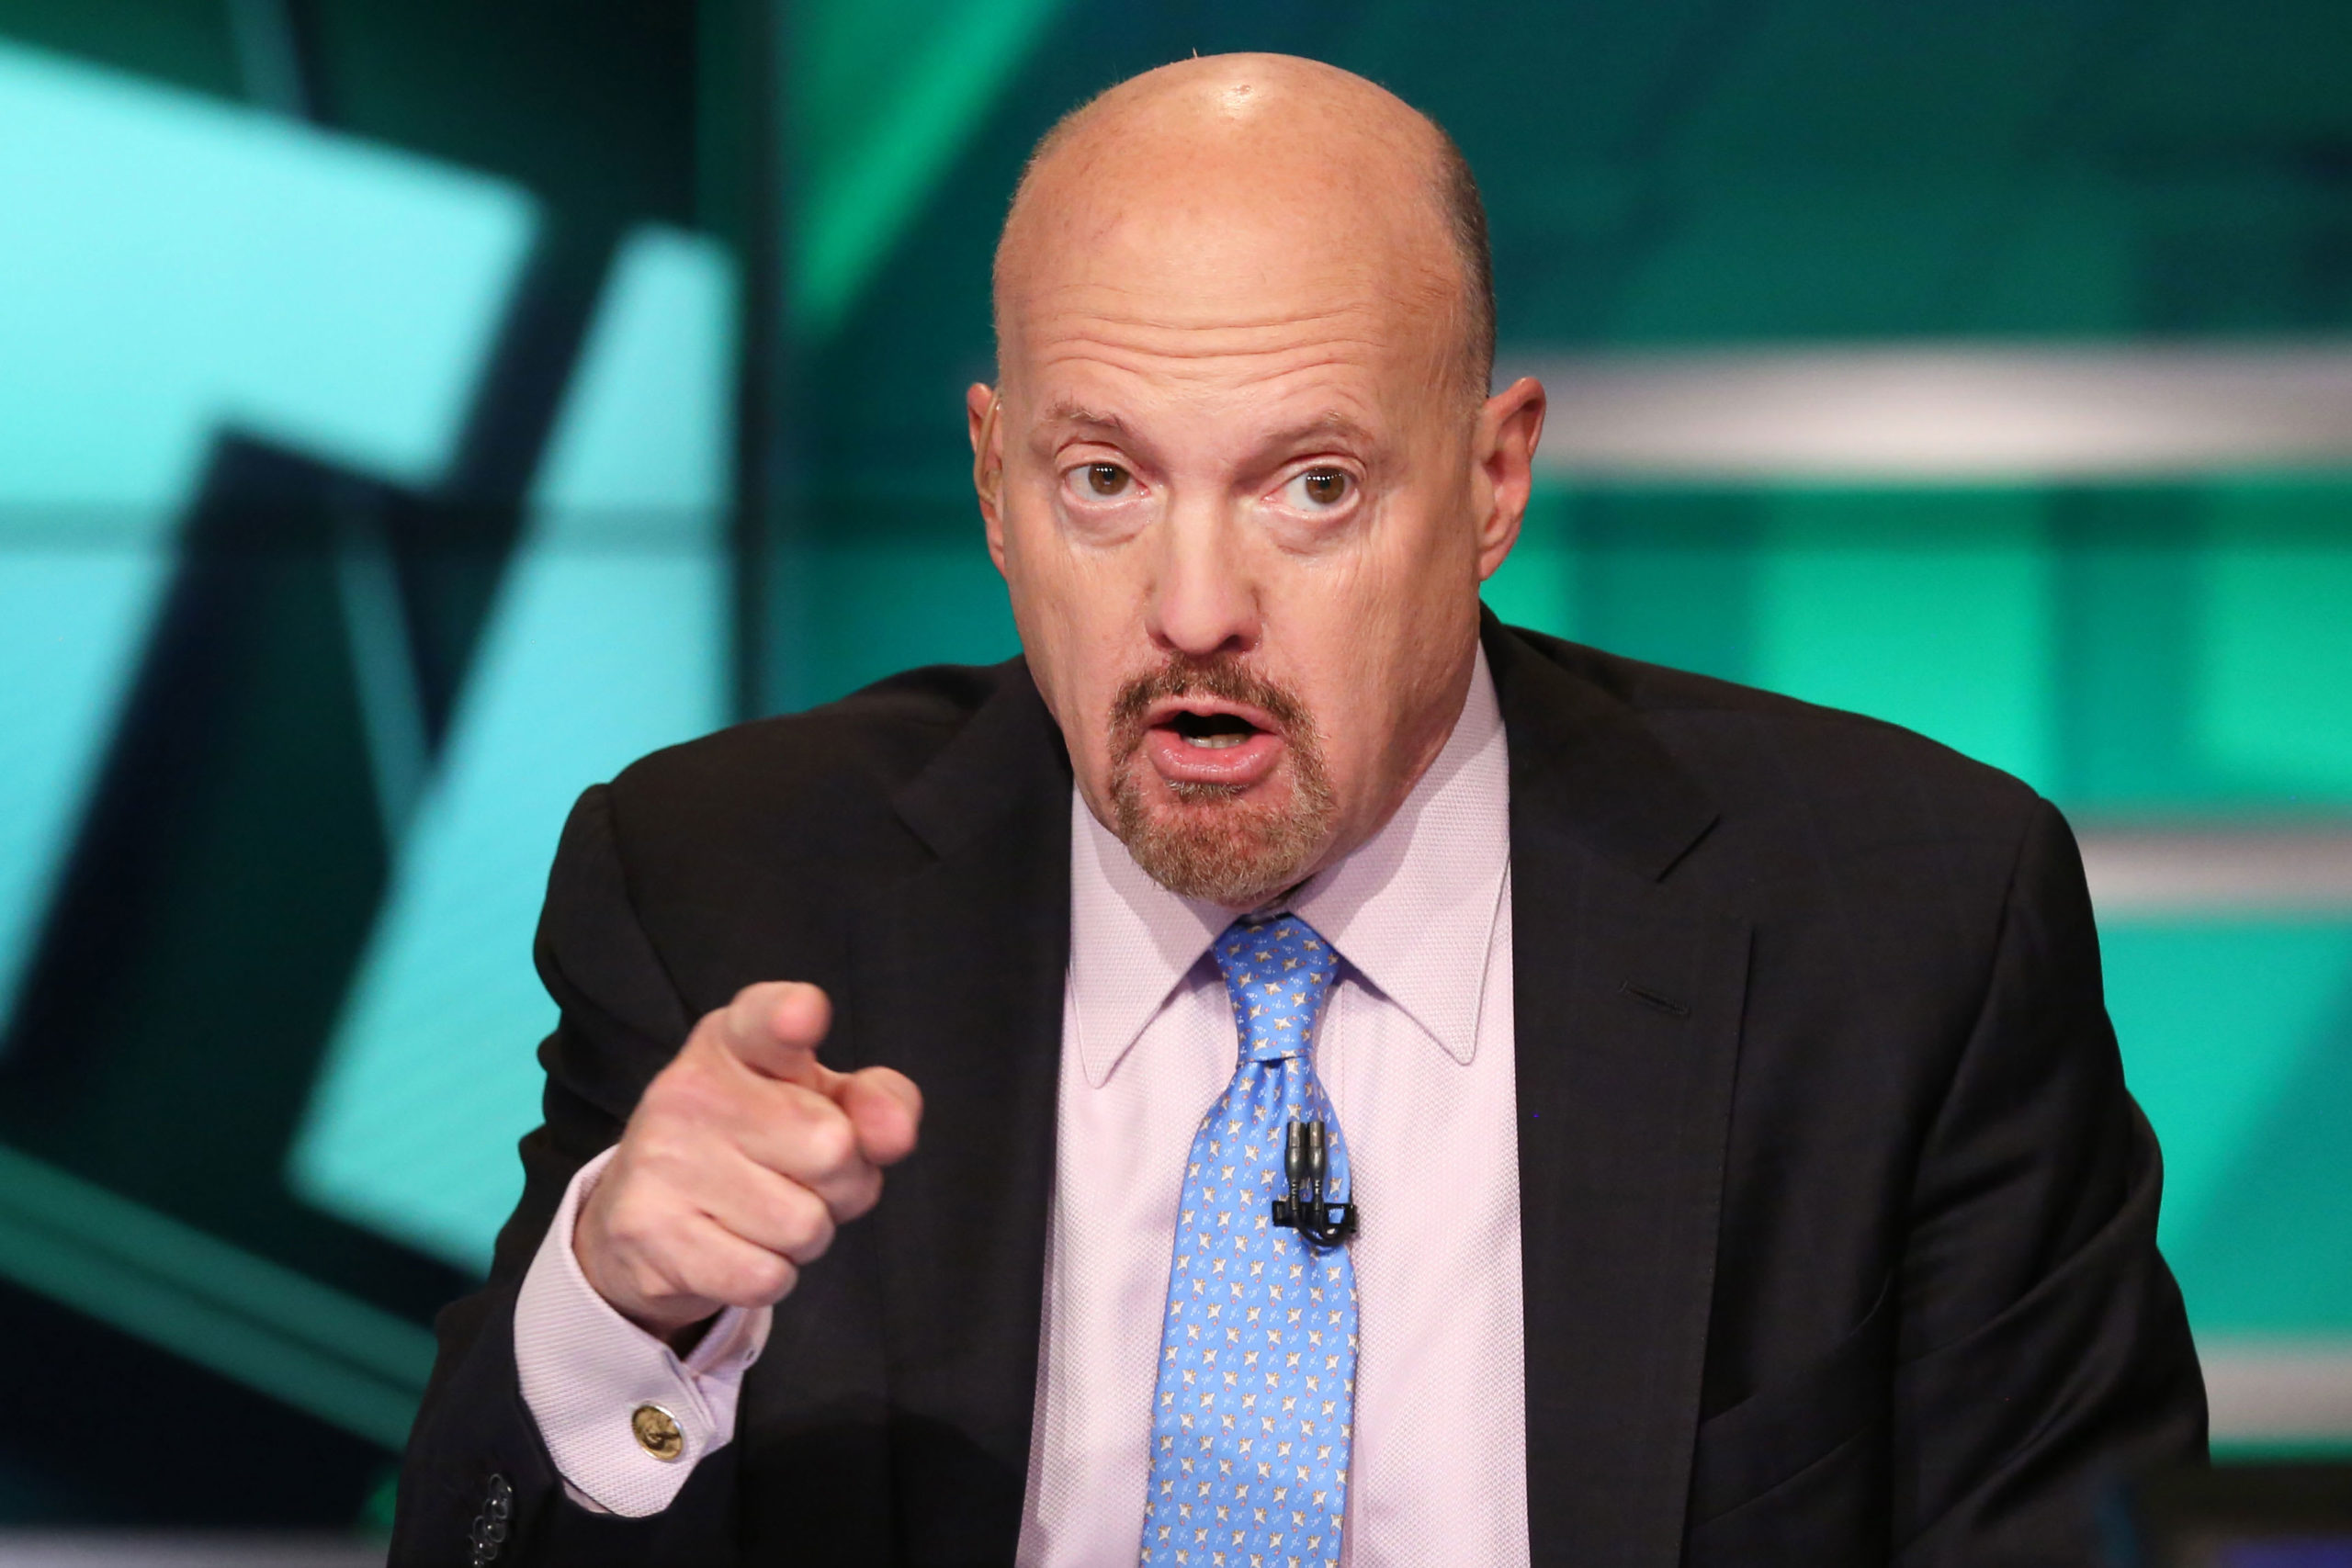 Cramer sees troubling indicators for market, says it is OK to promote winners